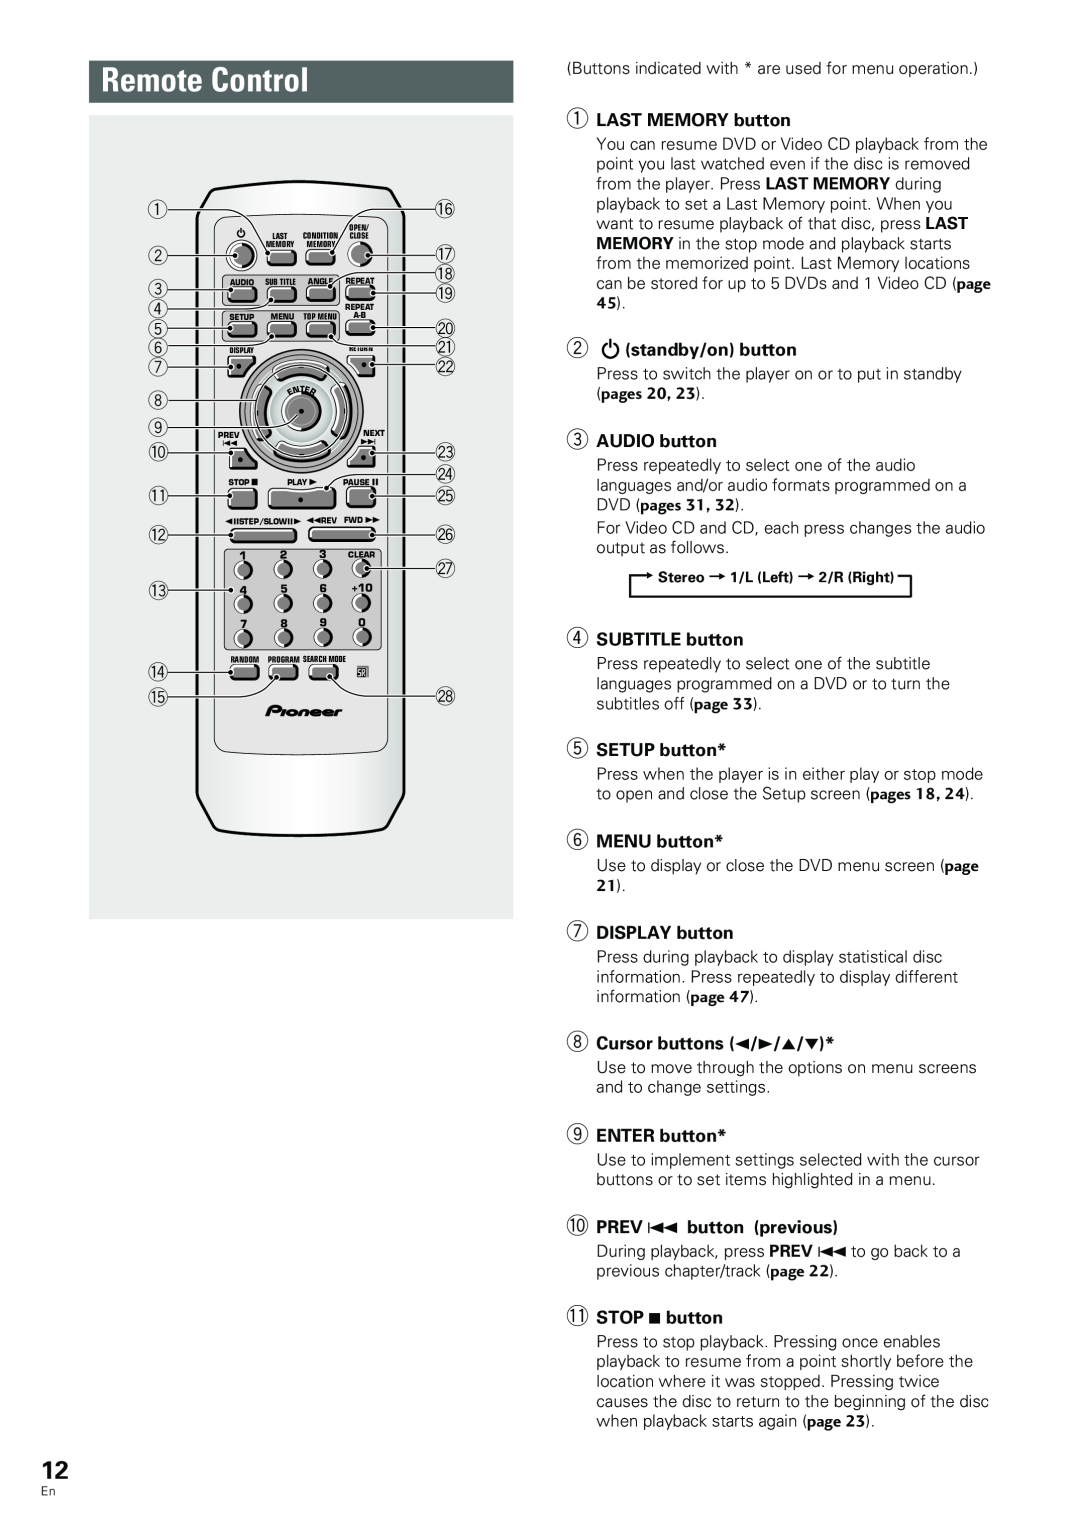 Pioneer DV-233 Remote Control, LAST MEMORY button, standby/on button, pages 20, AUDIO button, DVD pages 31, SETUP button 